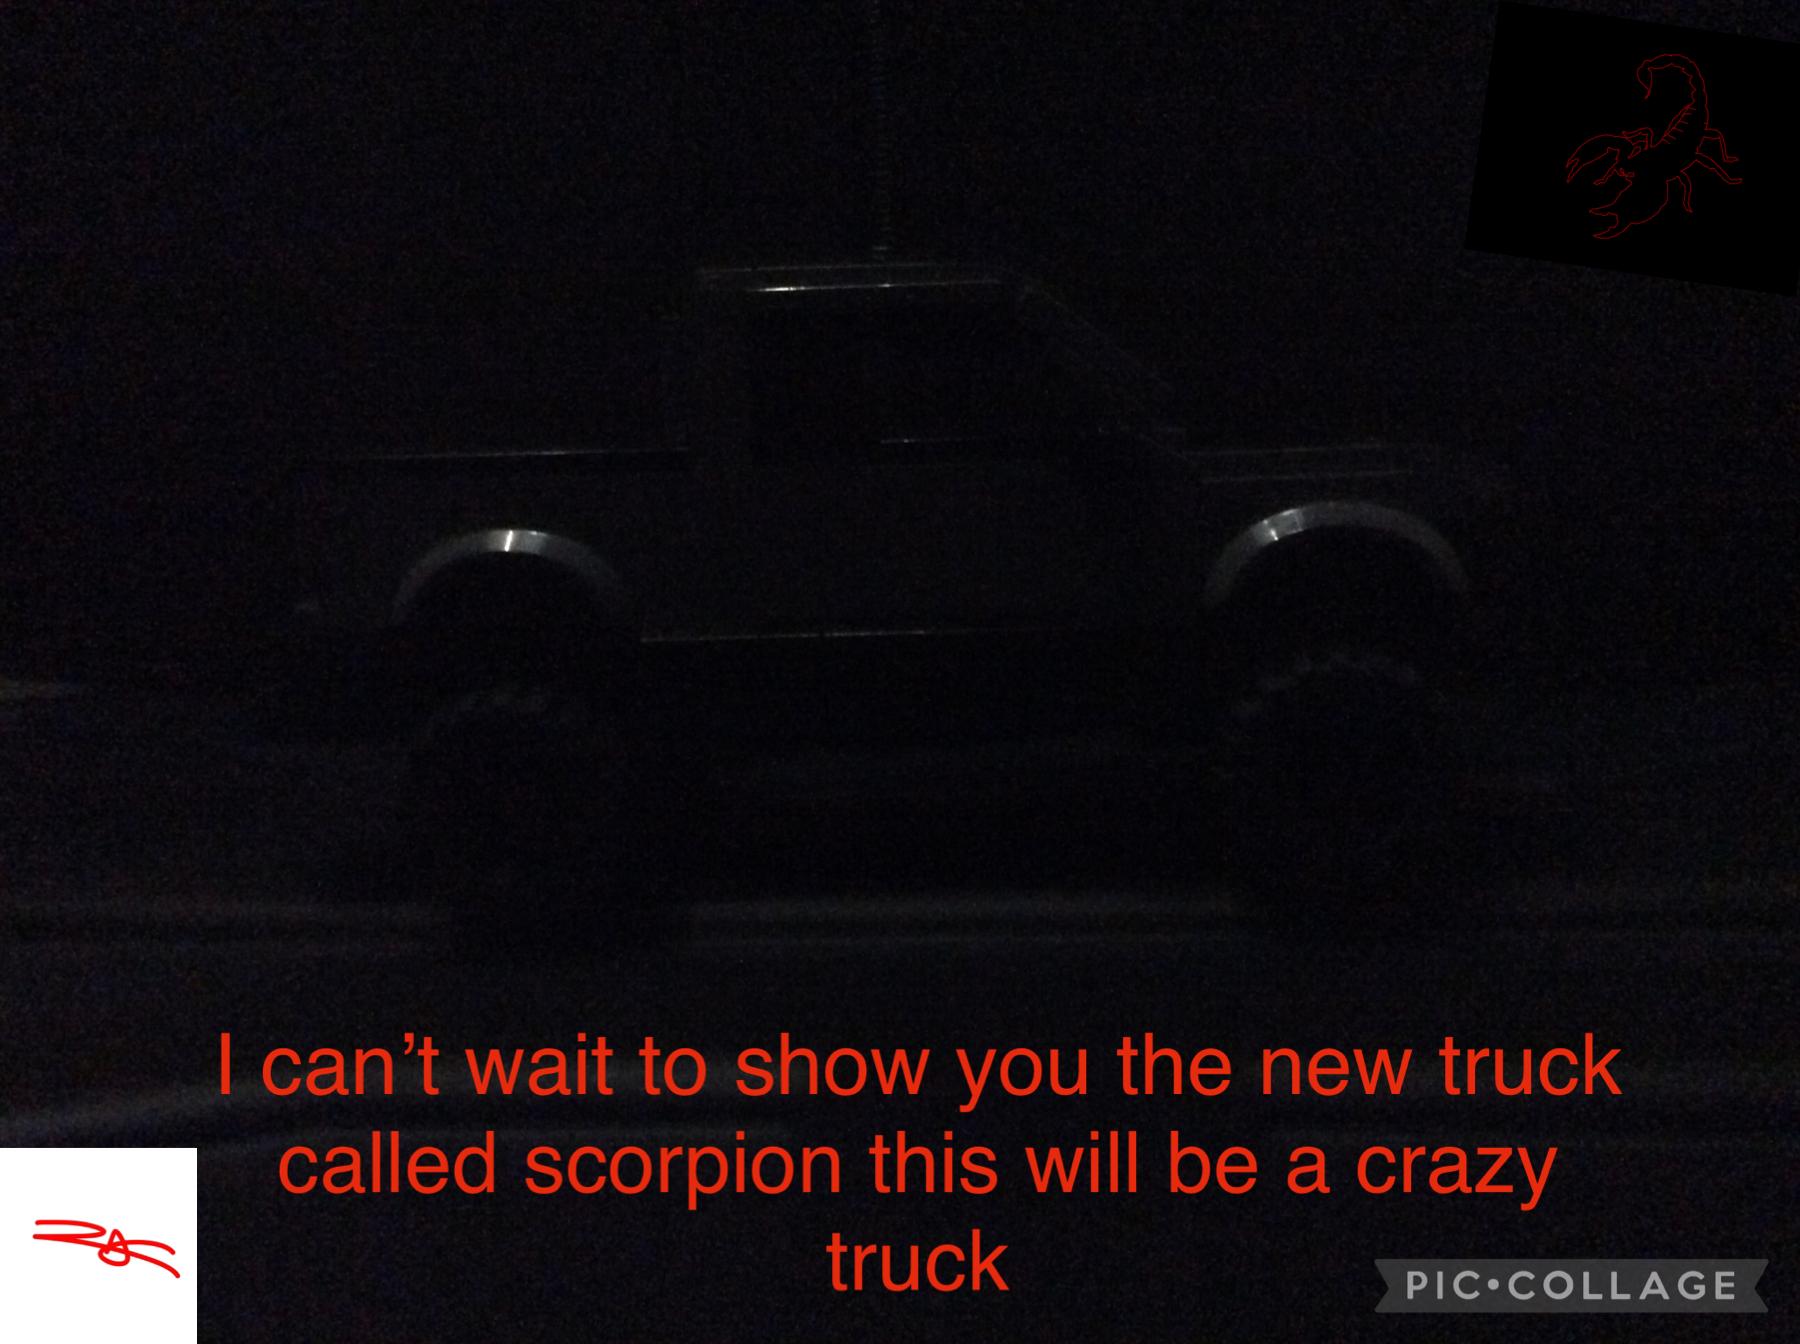 Tune in on January 8 to see The all new 2023 scorpion